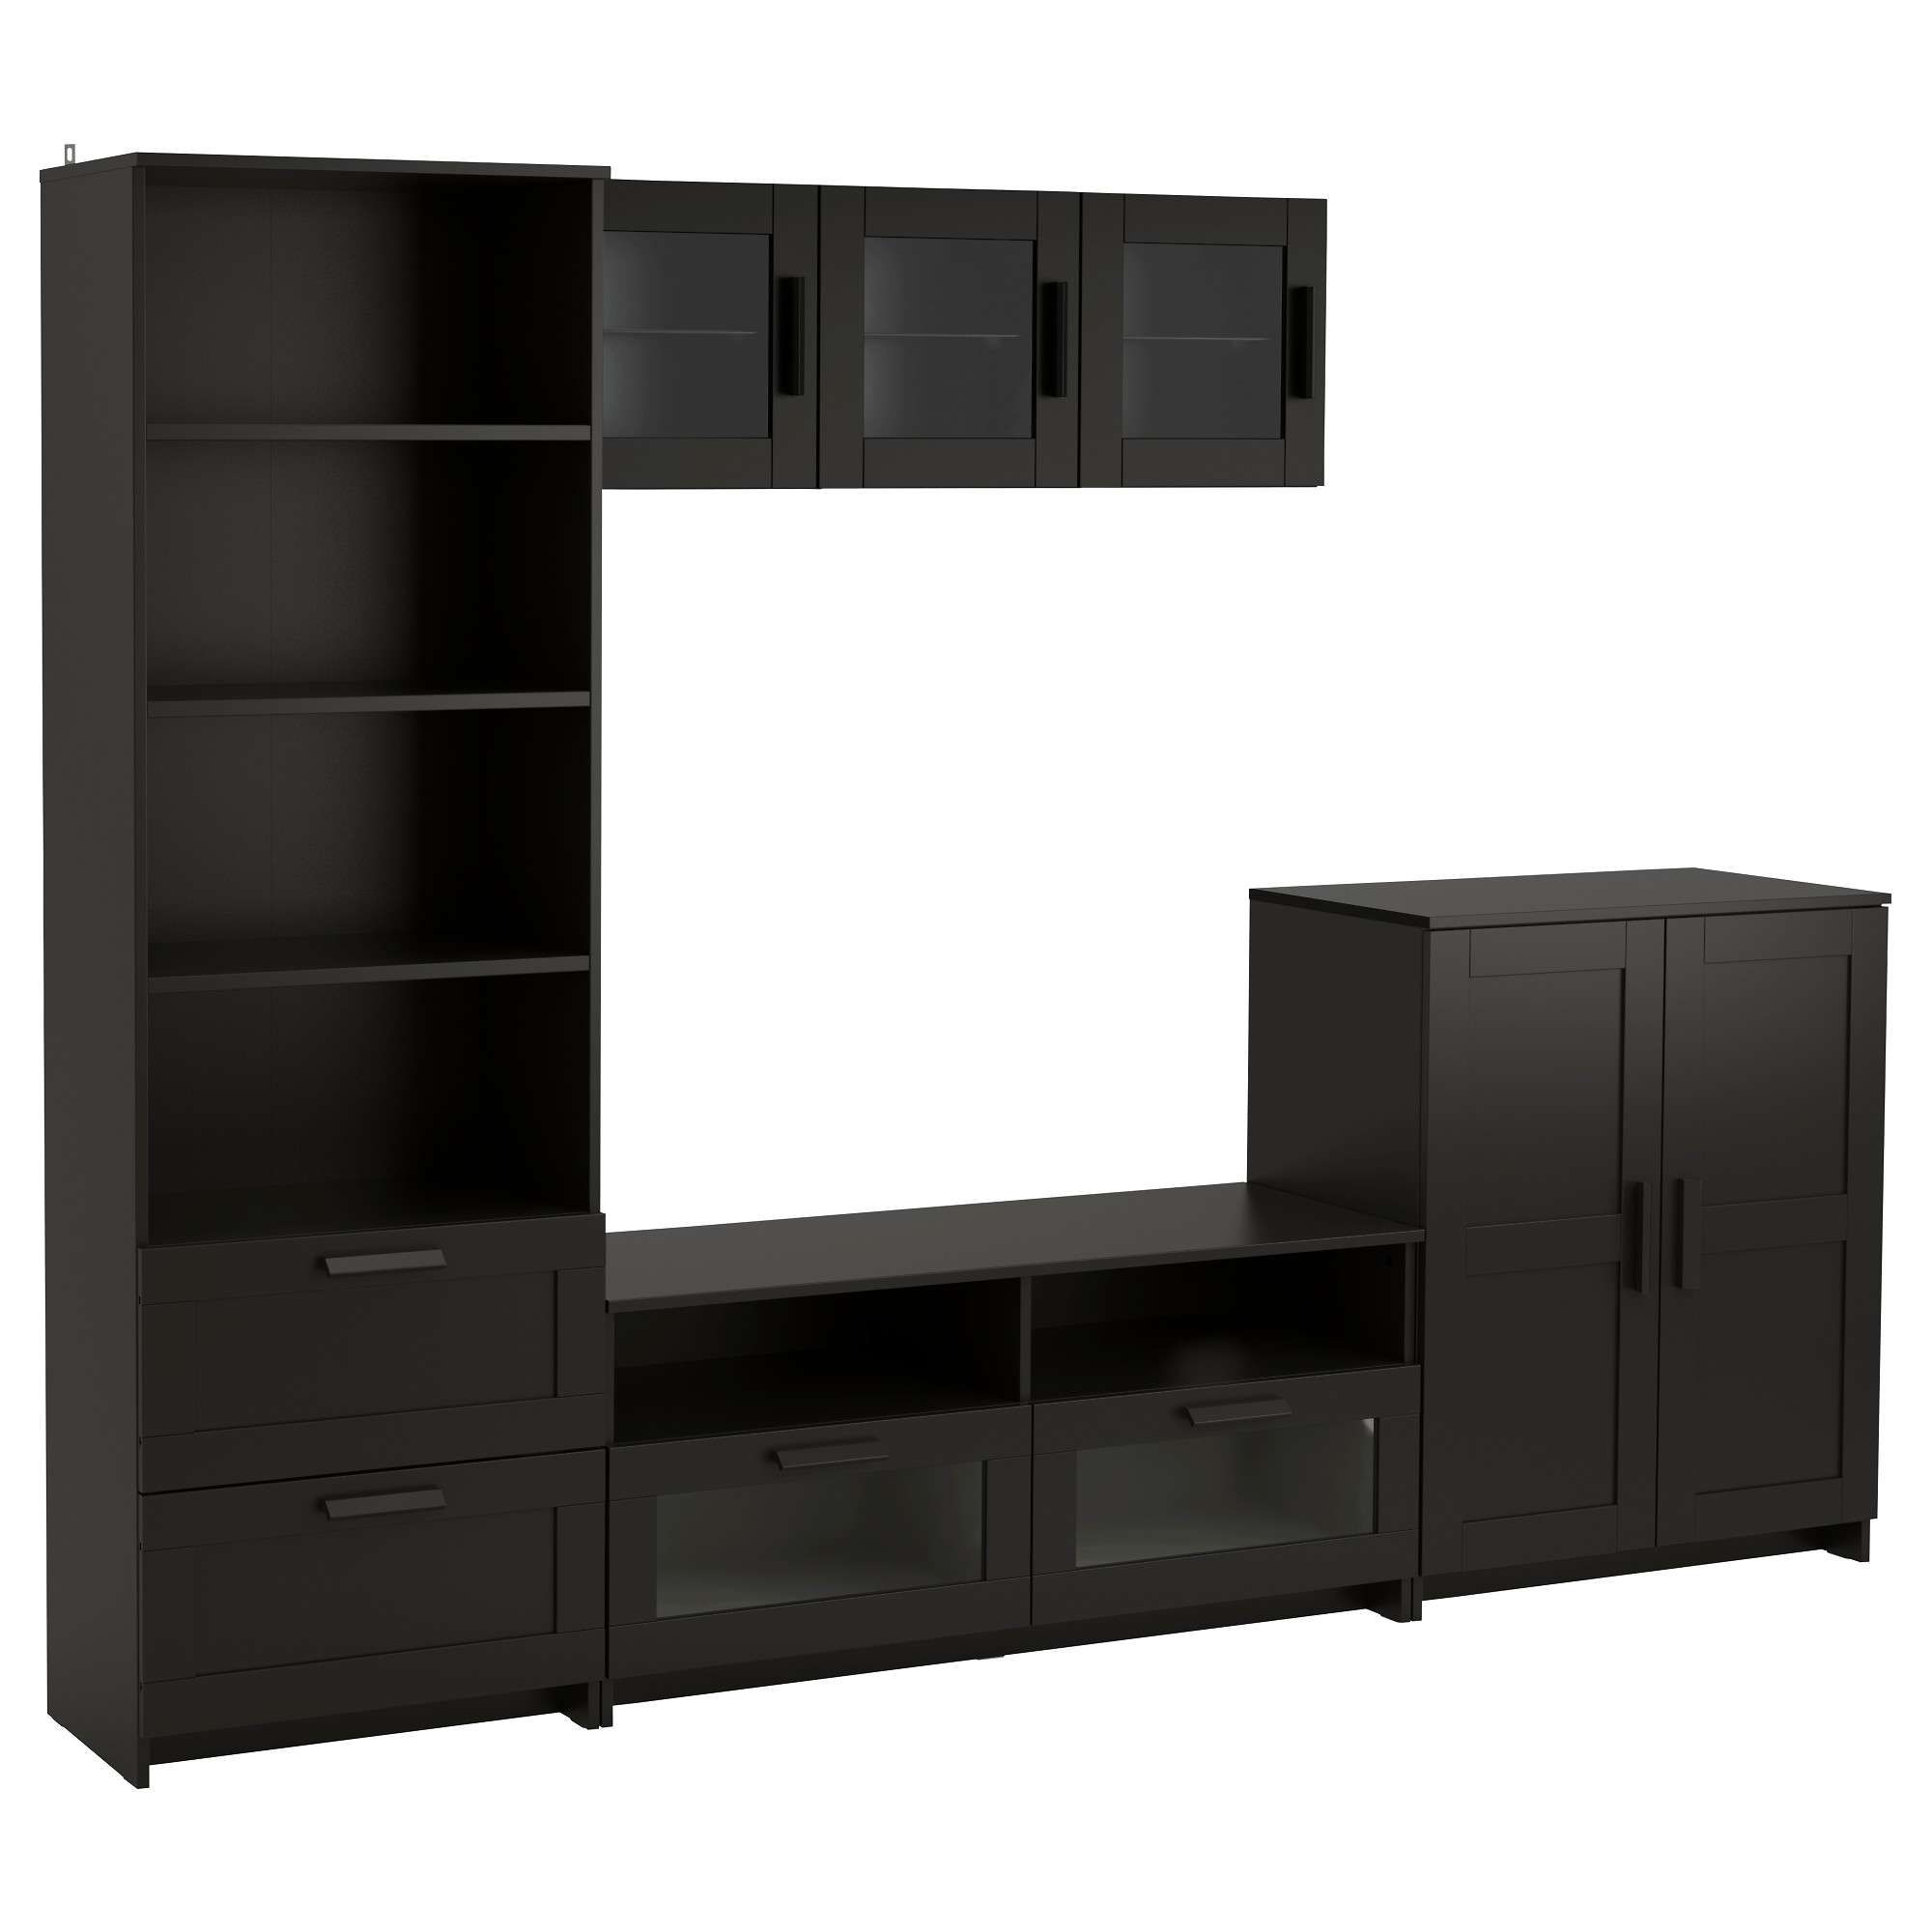 Top 20 Of Wall Mounted Tv Cabinets Ikea Throughout Tv Wall Cabinets (View 9 of 15)